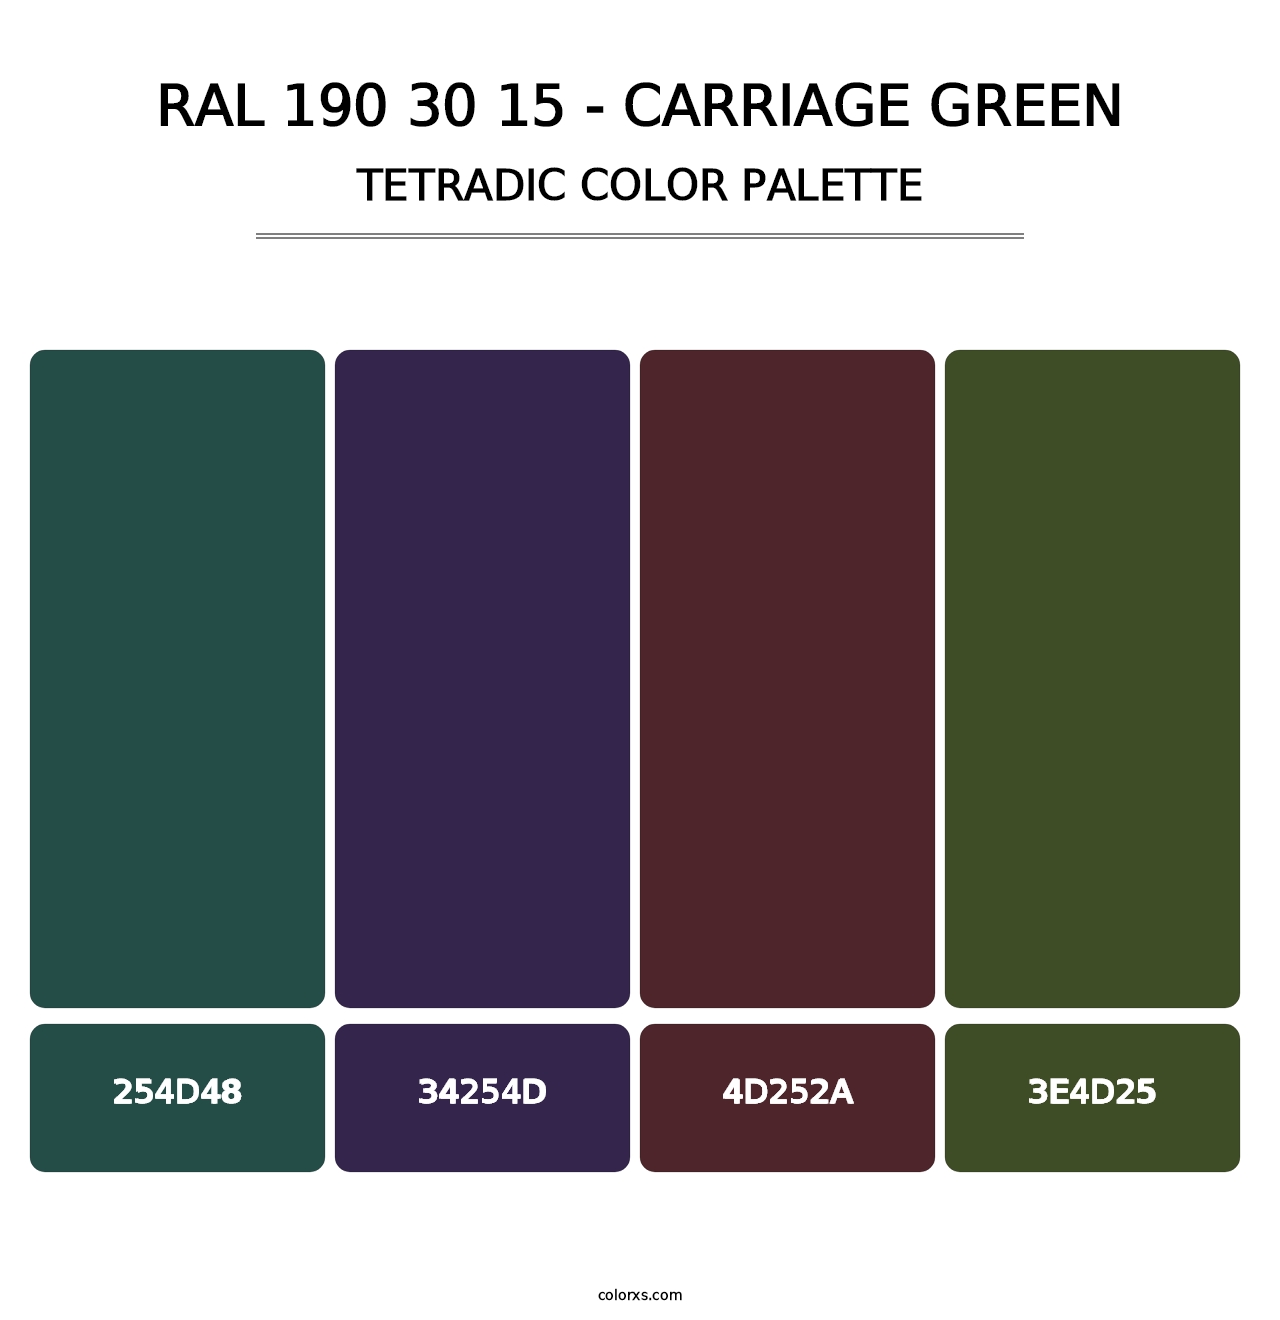 RAL 190 30 15 - Carriage Green - Tetradic Color Palette